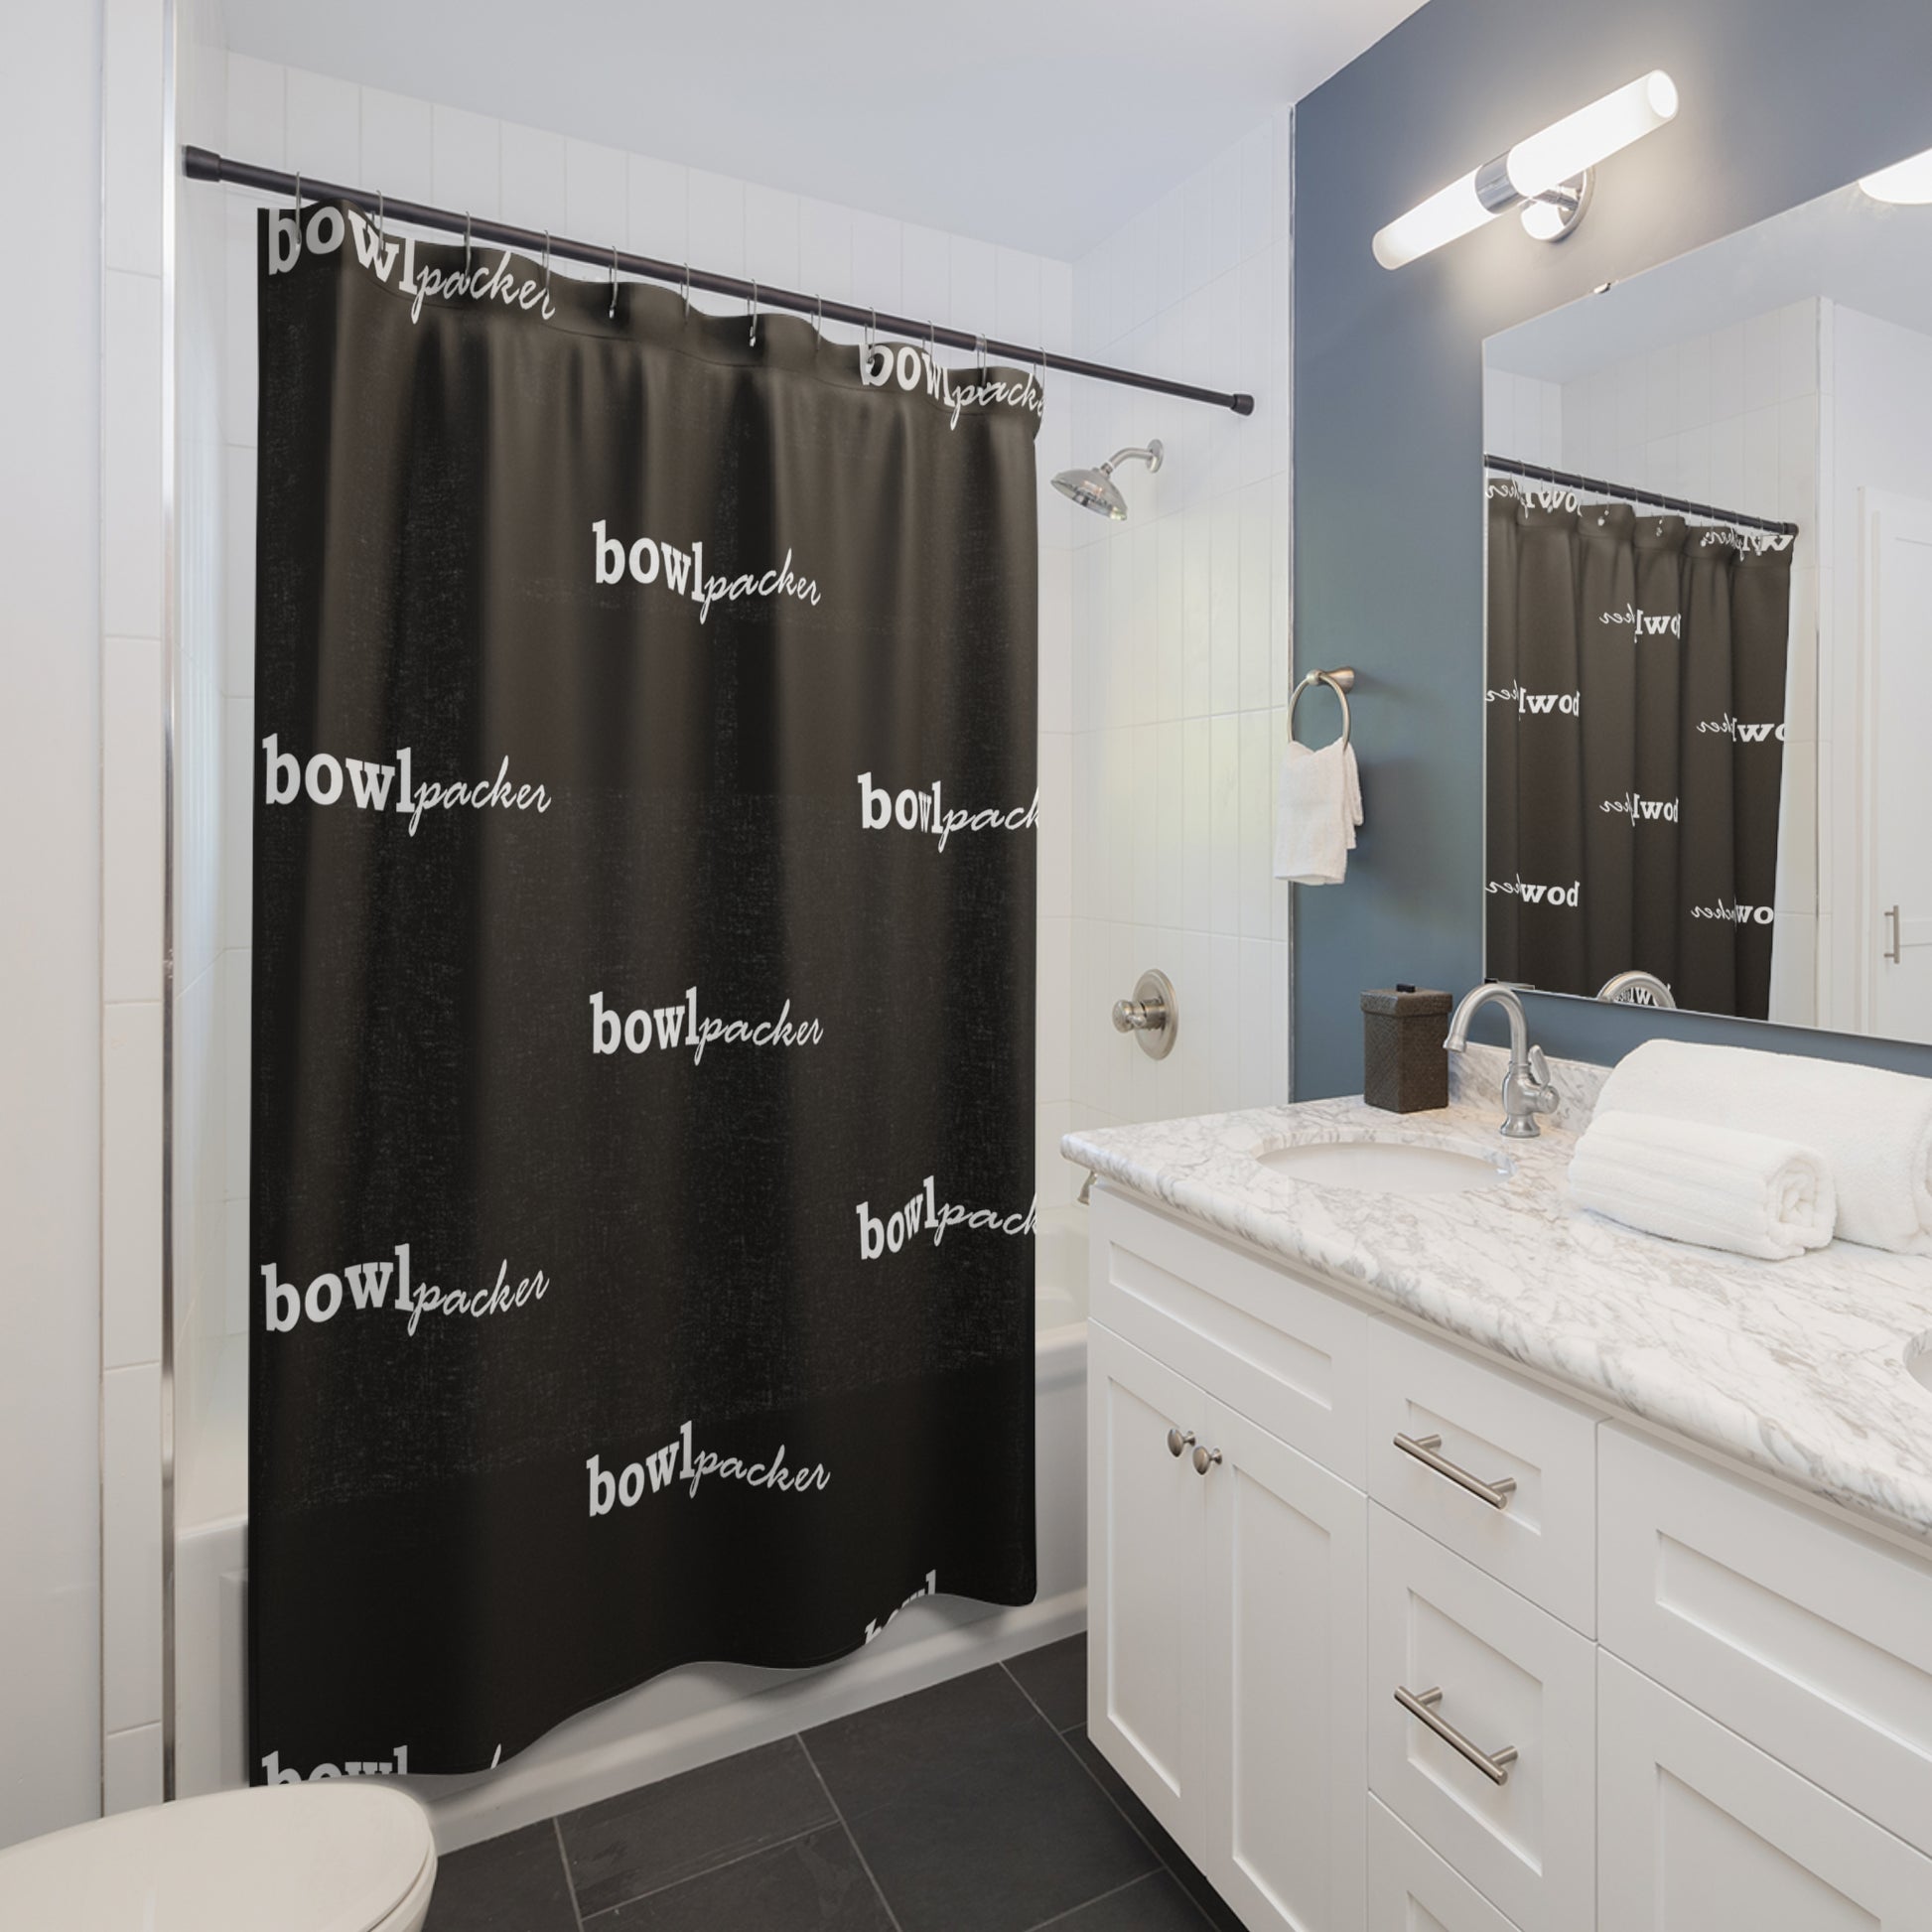 Black shower curtain which displays "bowl packer". This is shown in a bathroom.